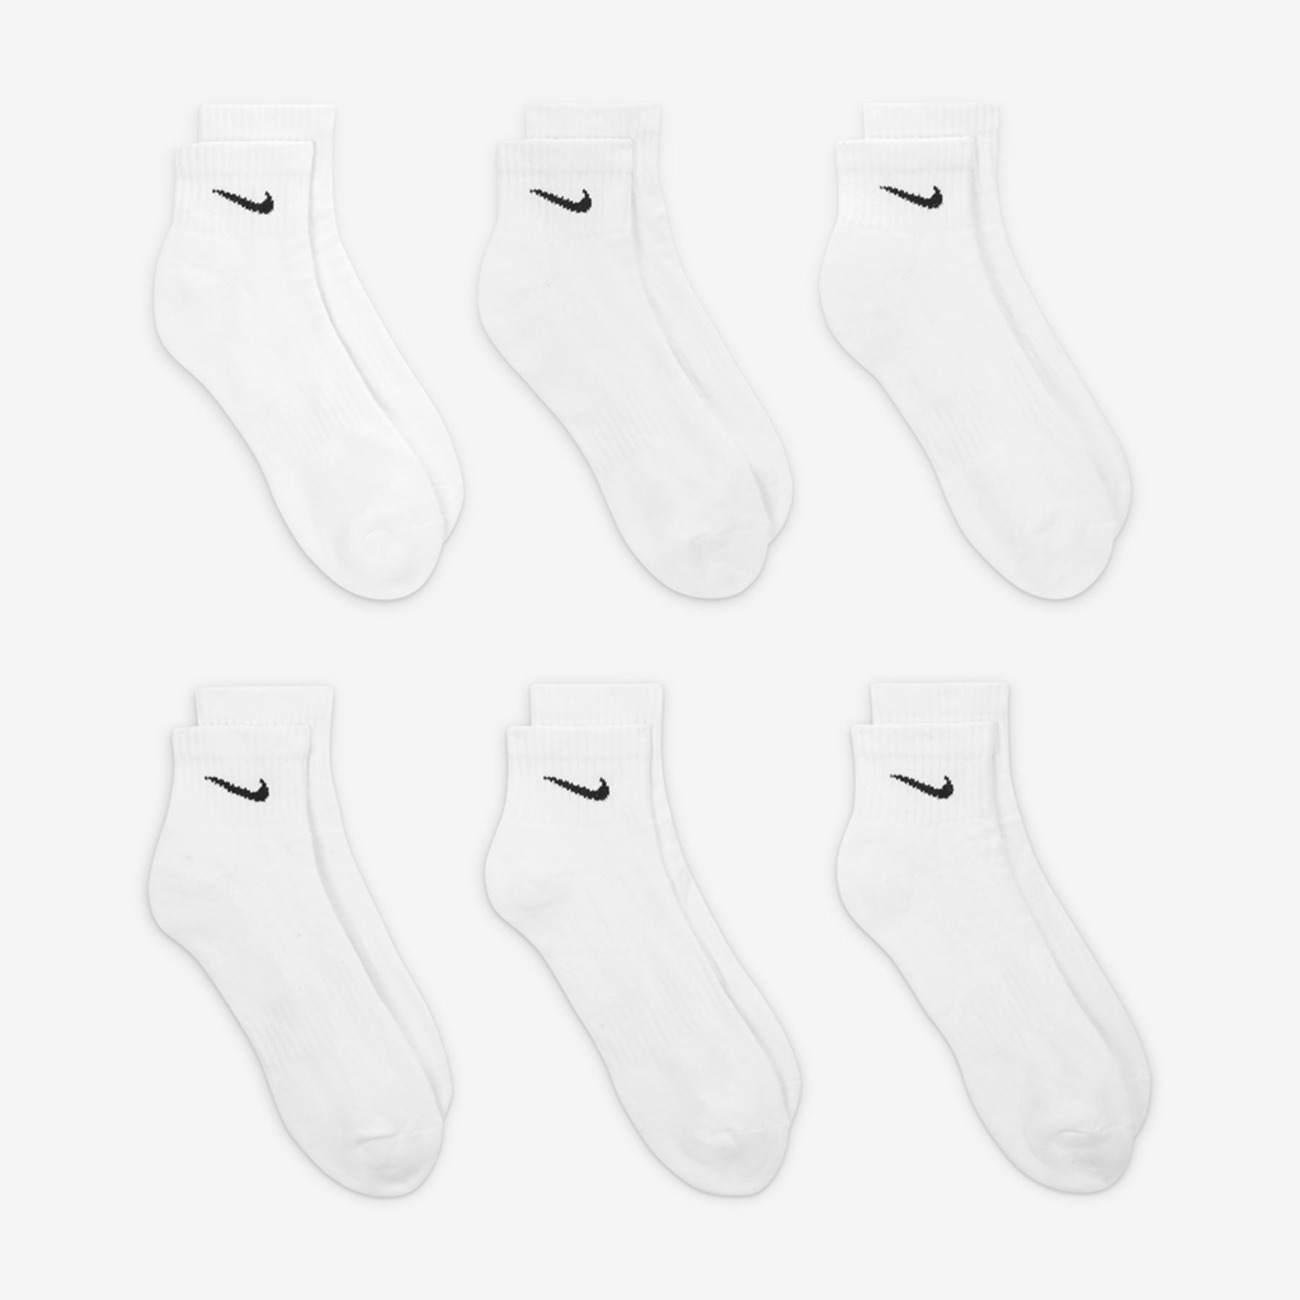 Meia Nike Everyday Cushioned Unissex (6 Pares) - Foto 5